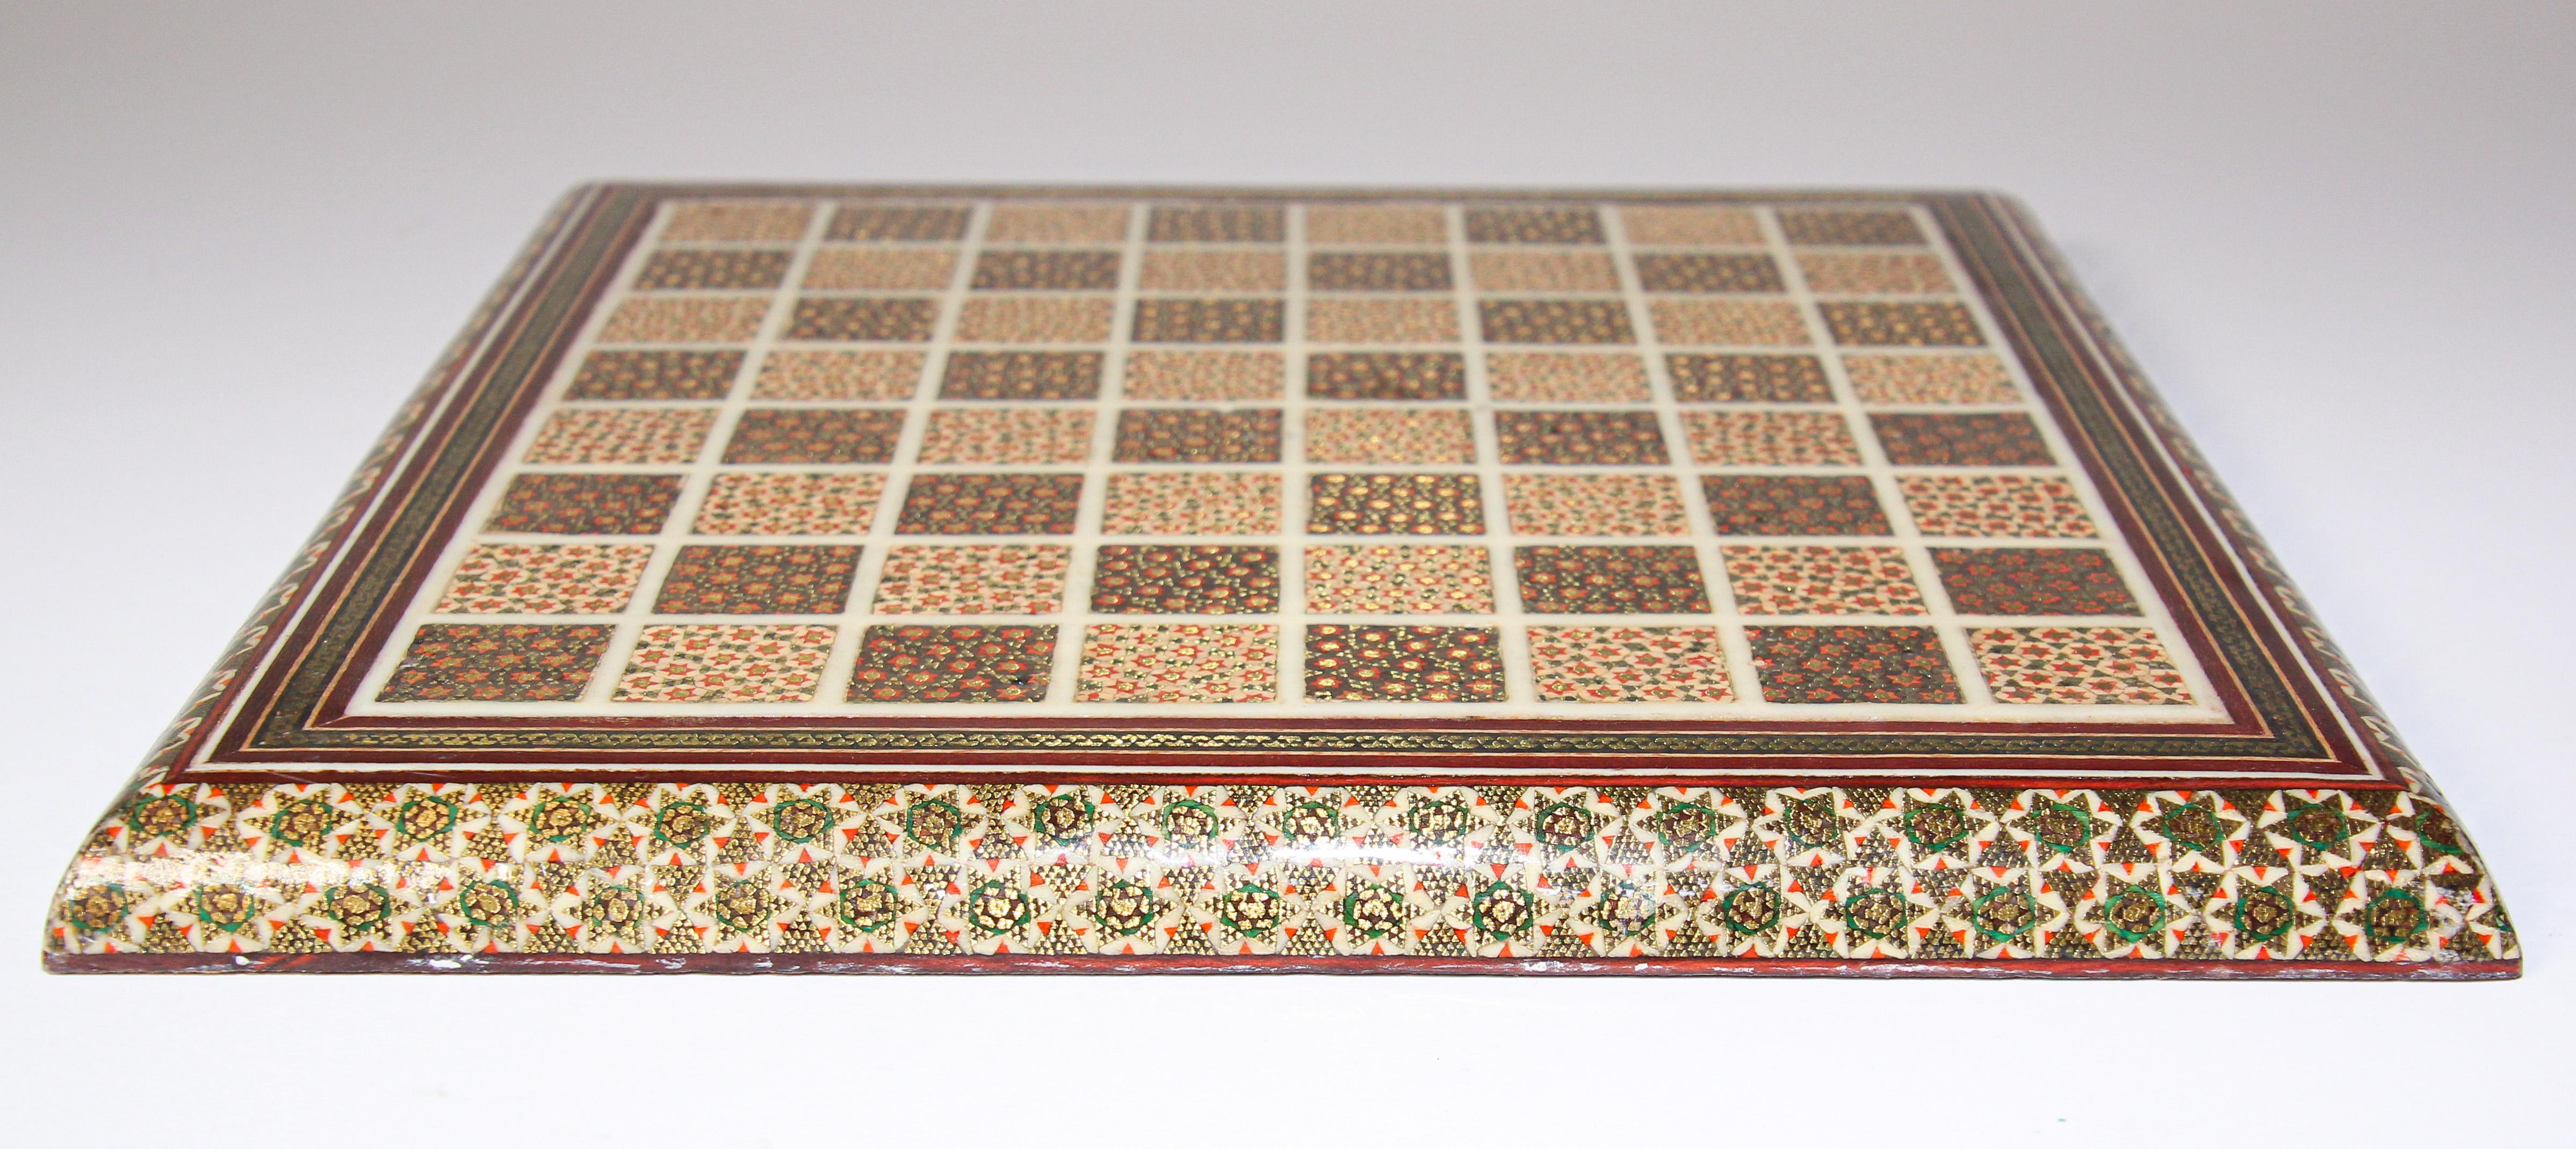 Middle Eastern Persian Khatam Chess Game 8